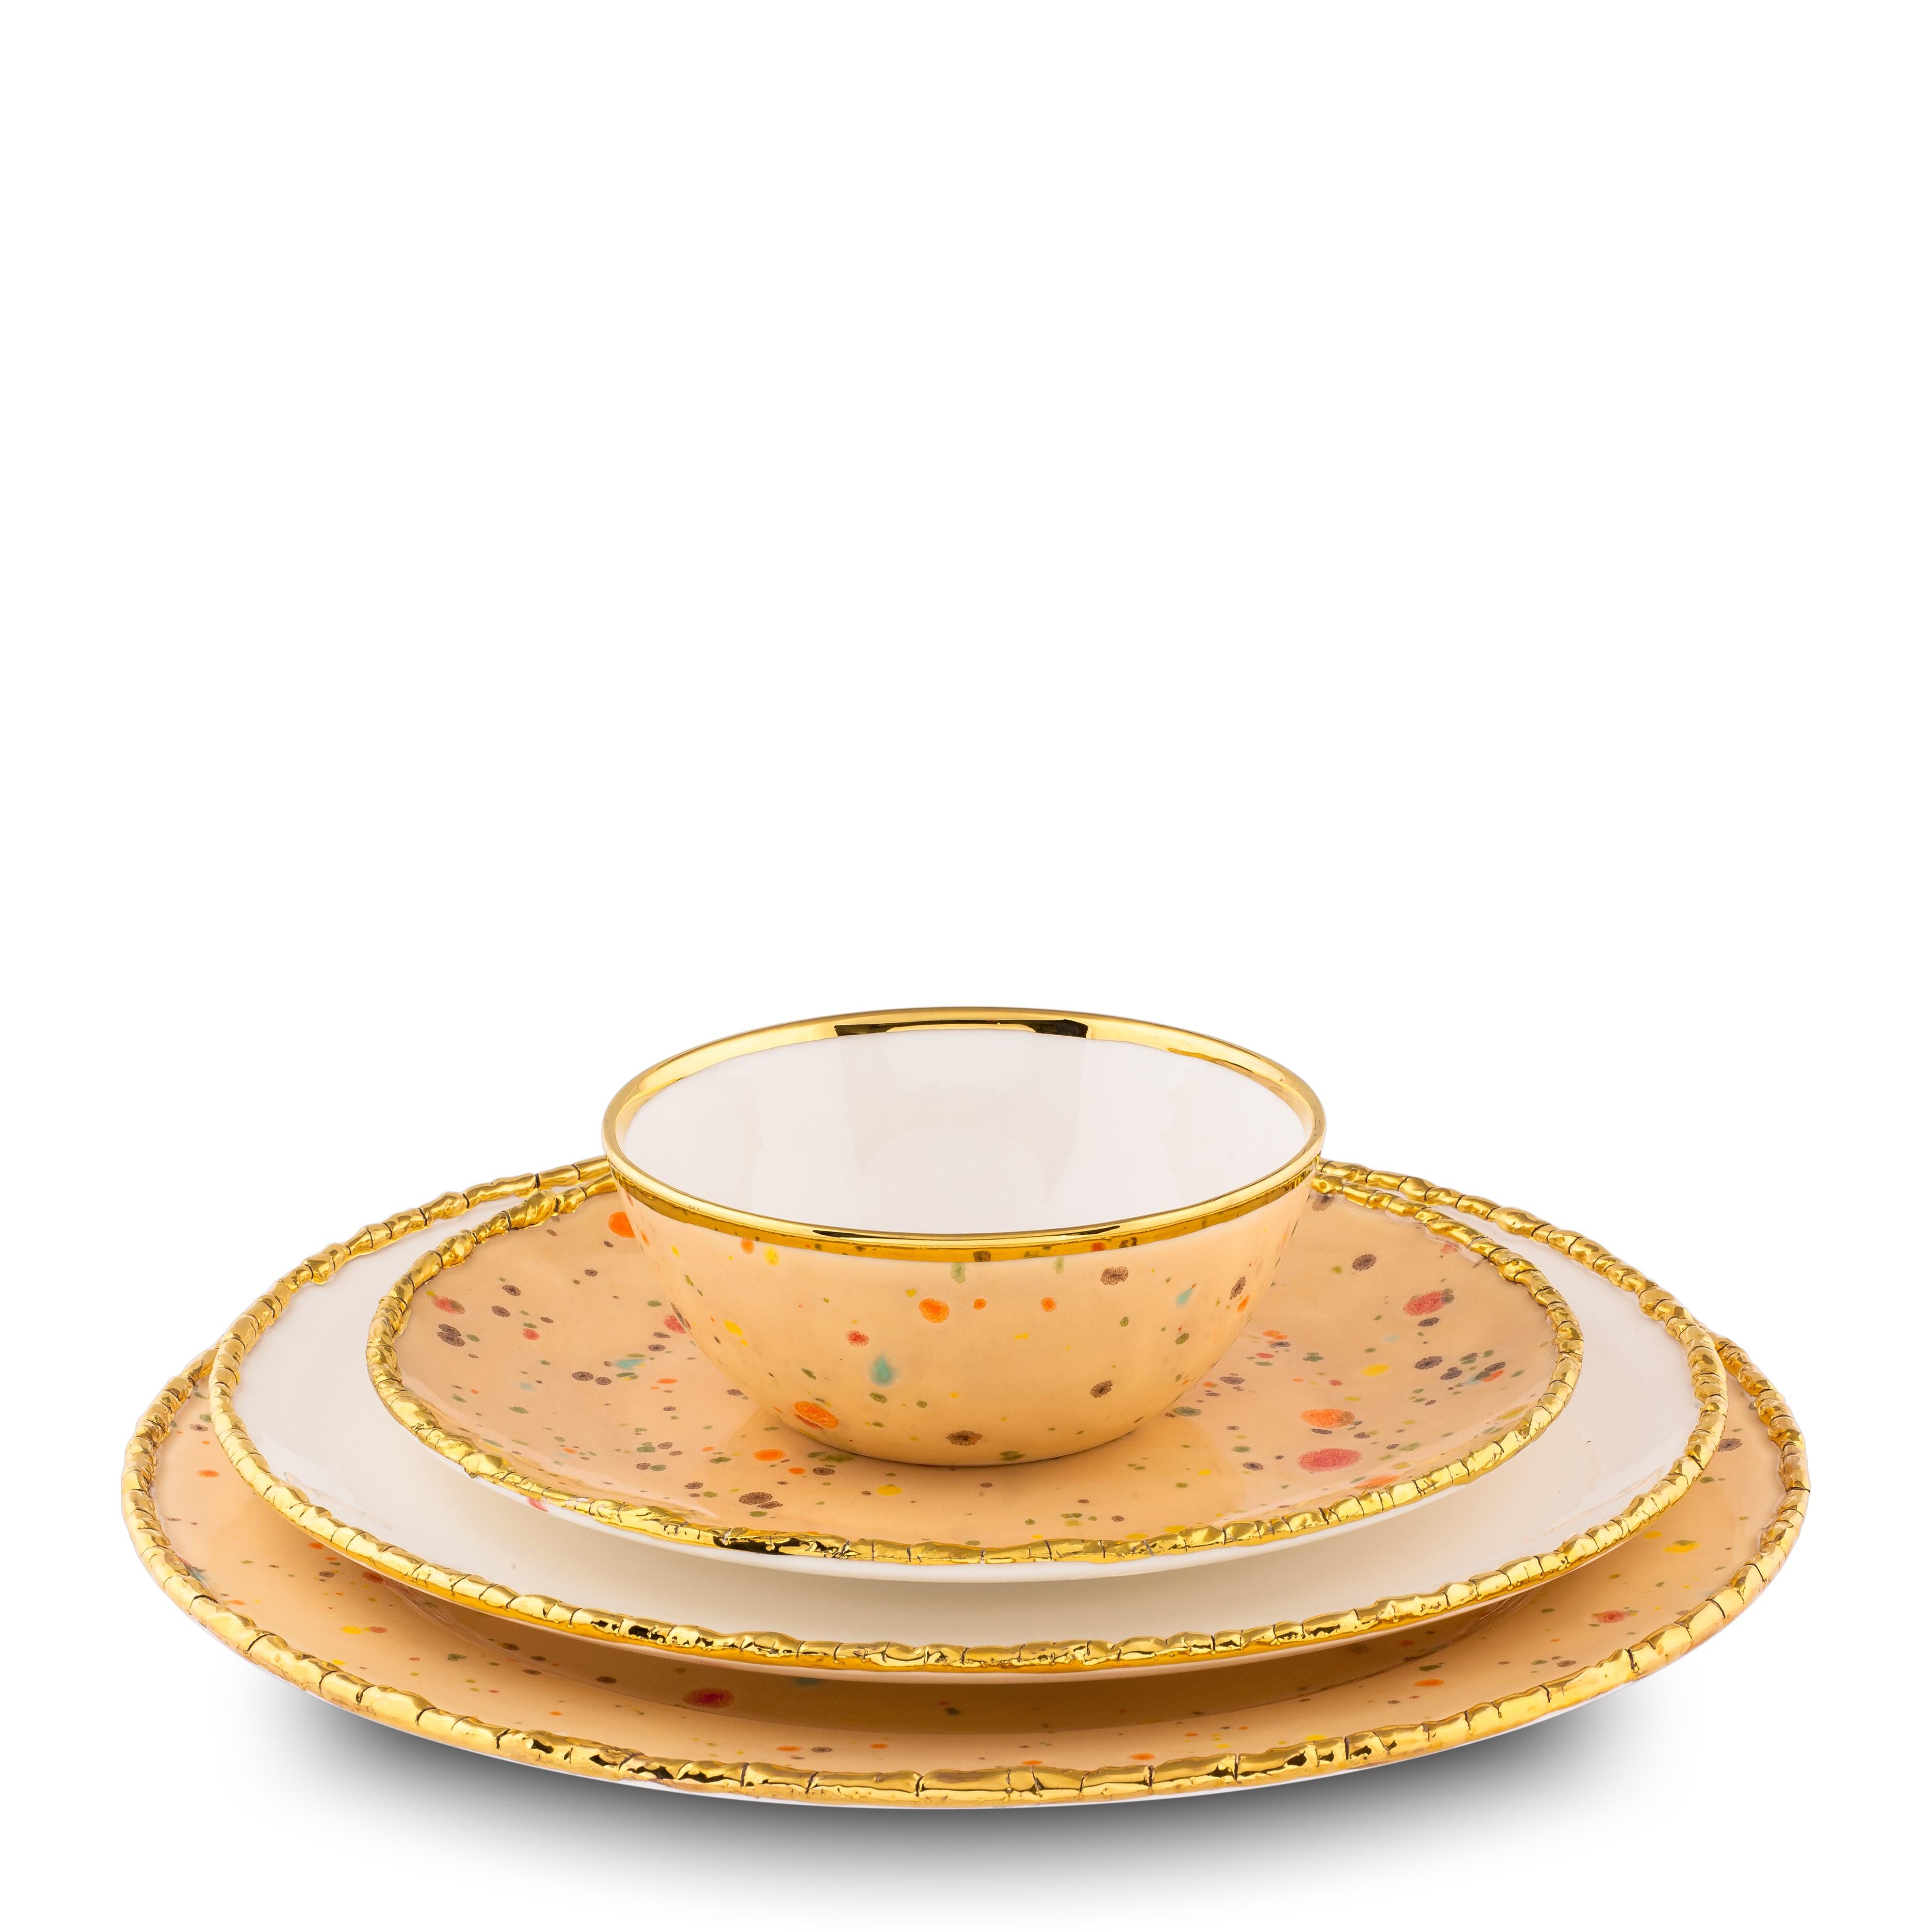 Handcrafted in Italy from the finest porcelain, these Craquelé edge dessert coupe plates from the Chestnut Collection. The original golden crackled edge emphasizes the warm sandy surface covered with little multicolor dots and the bright yellow